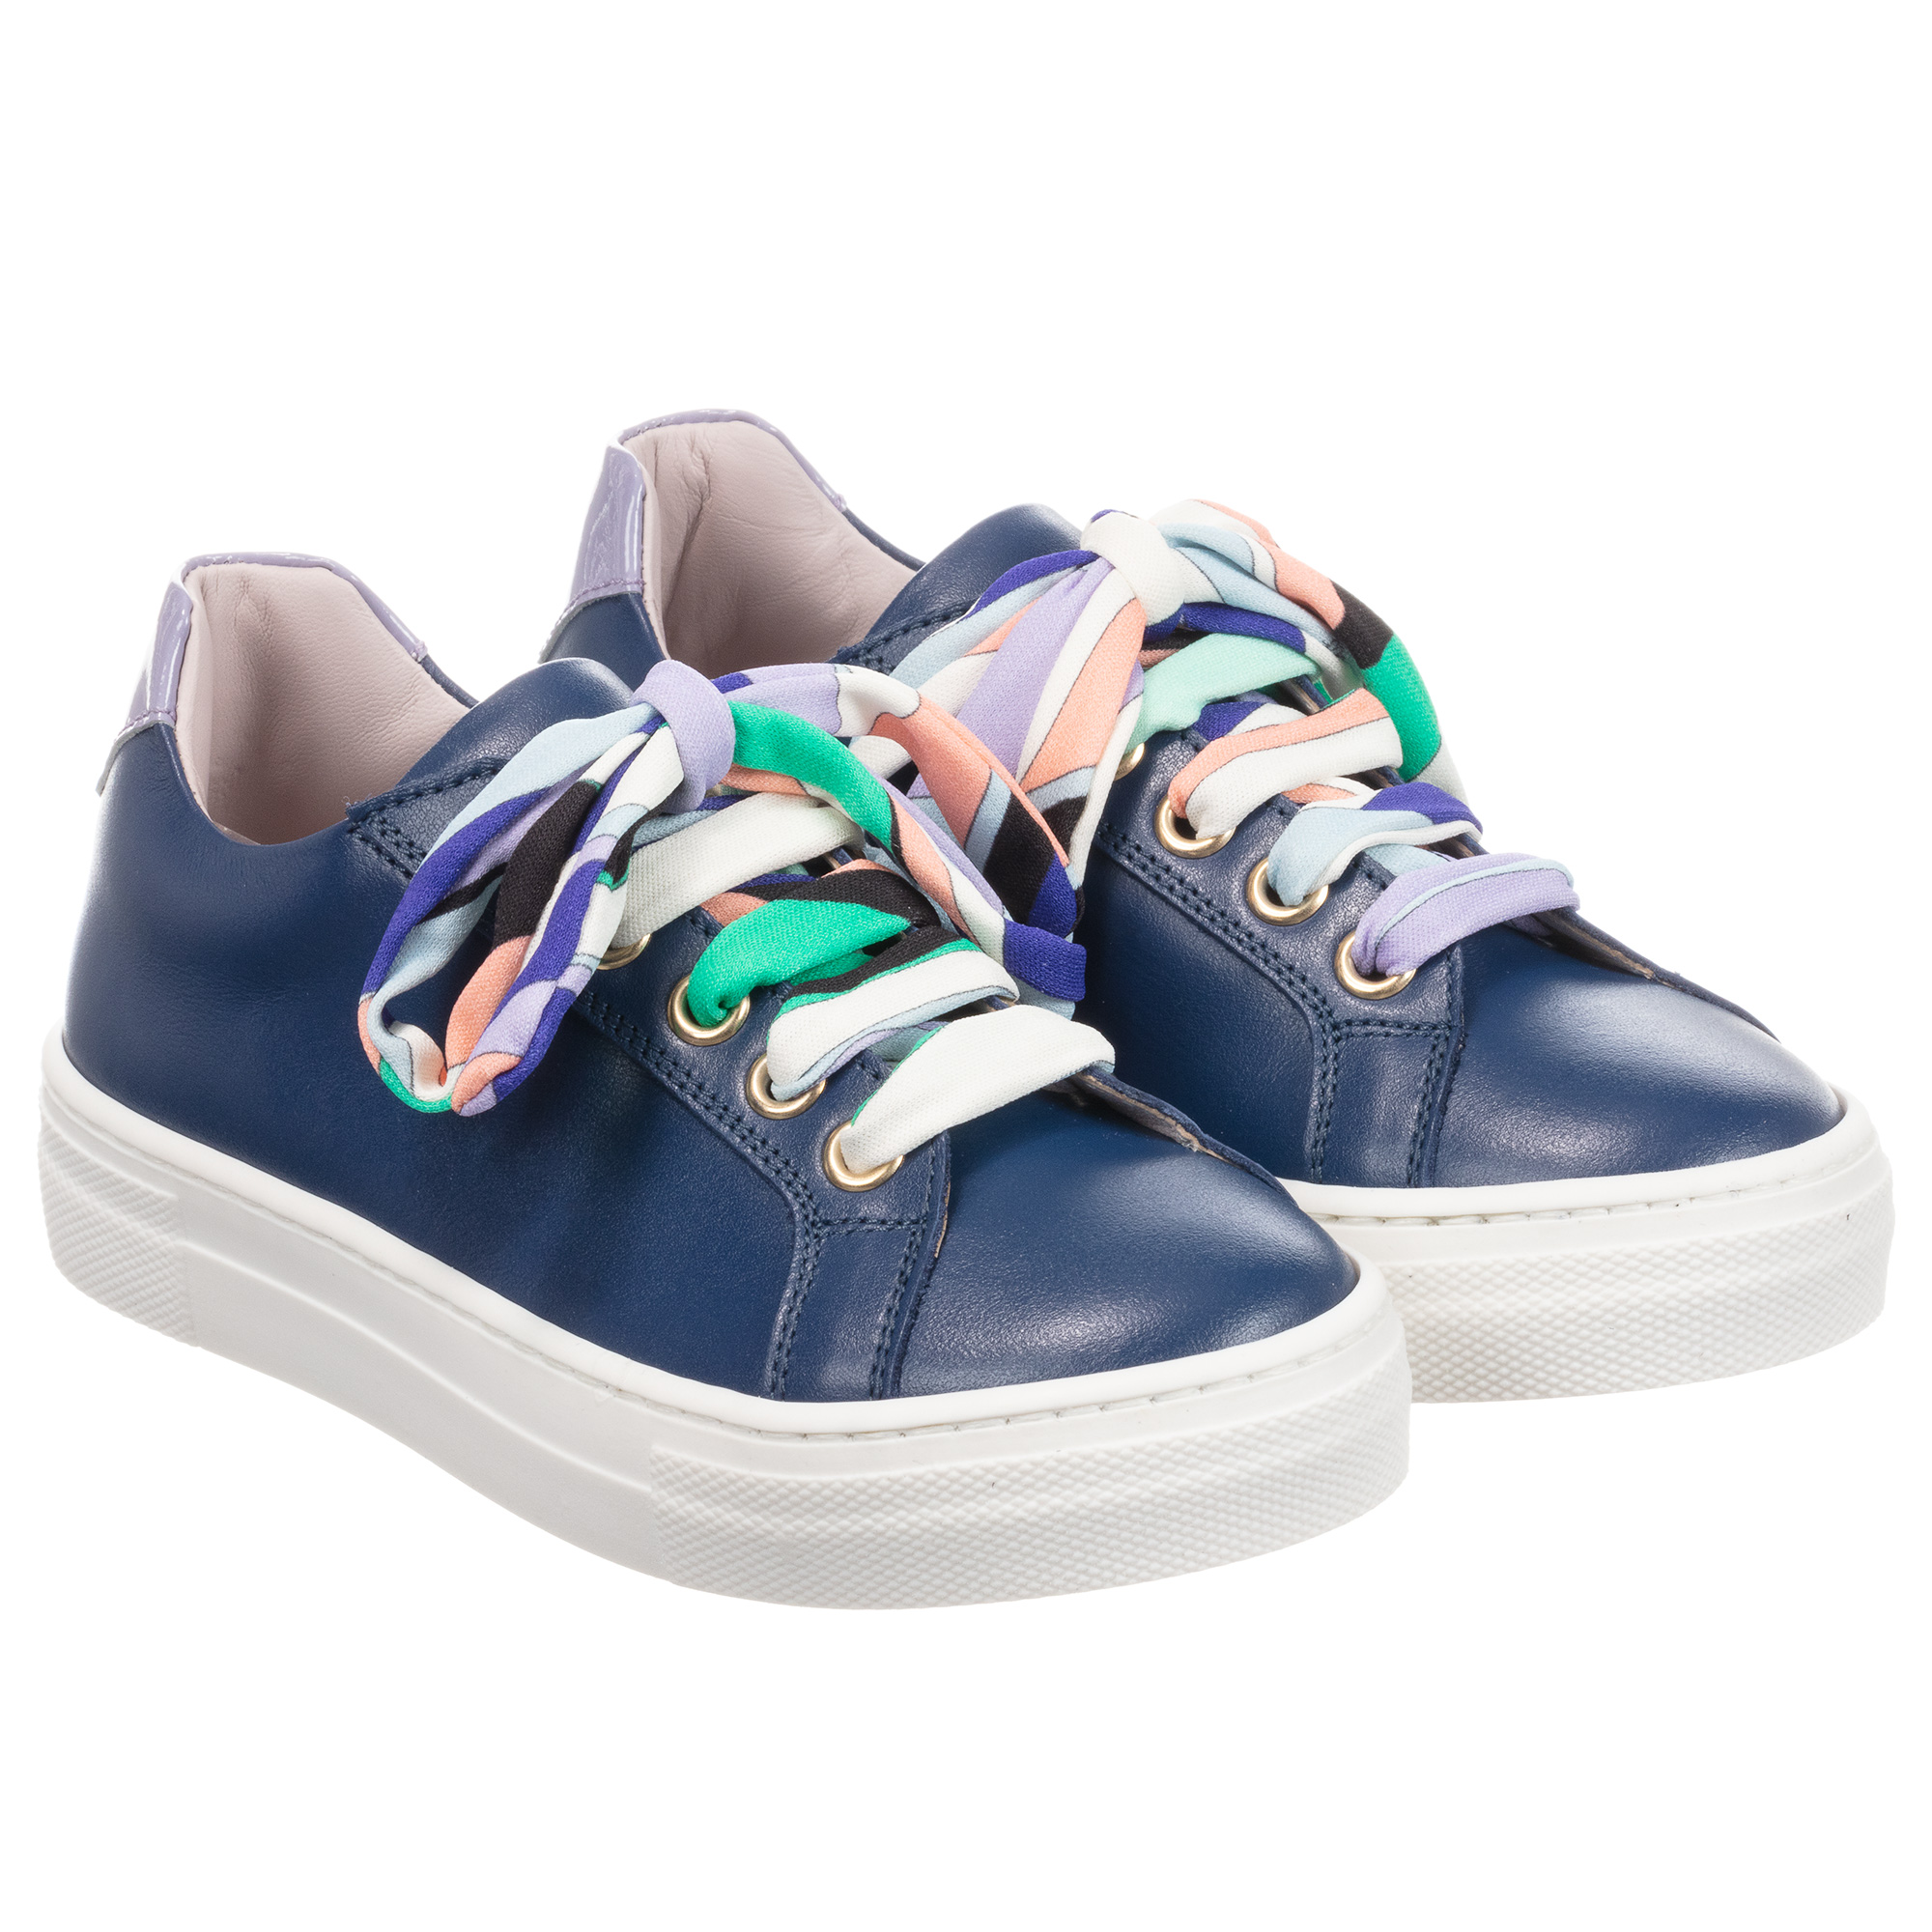 Emilio Pucci shoes for girls